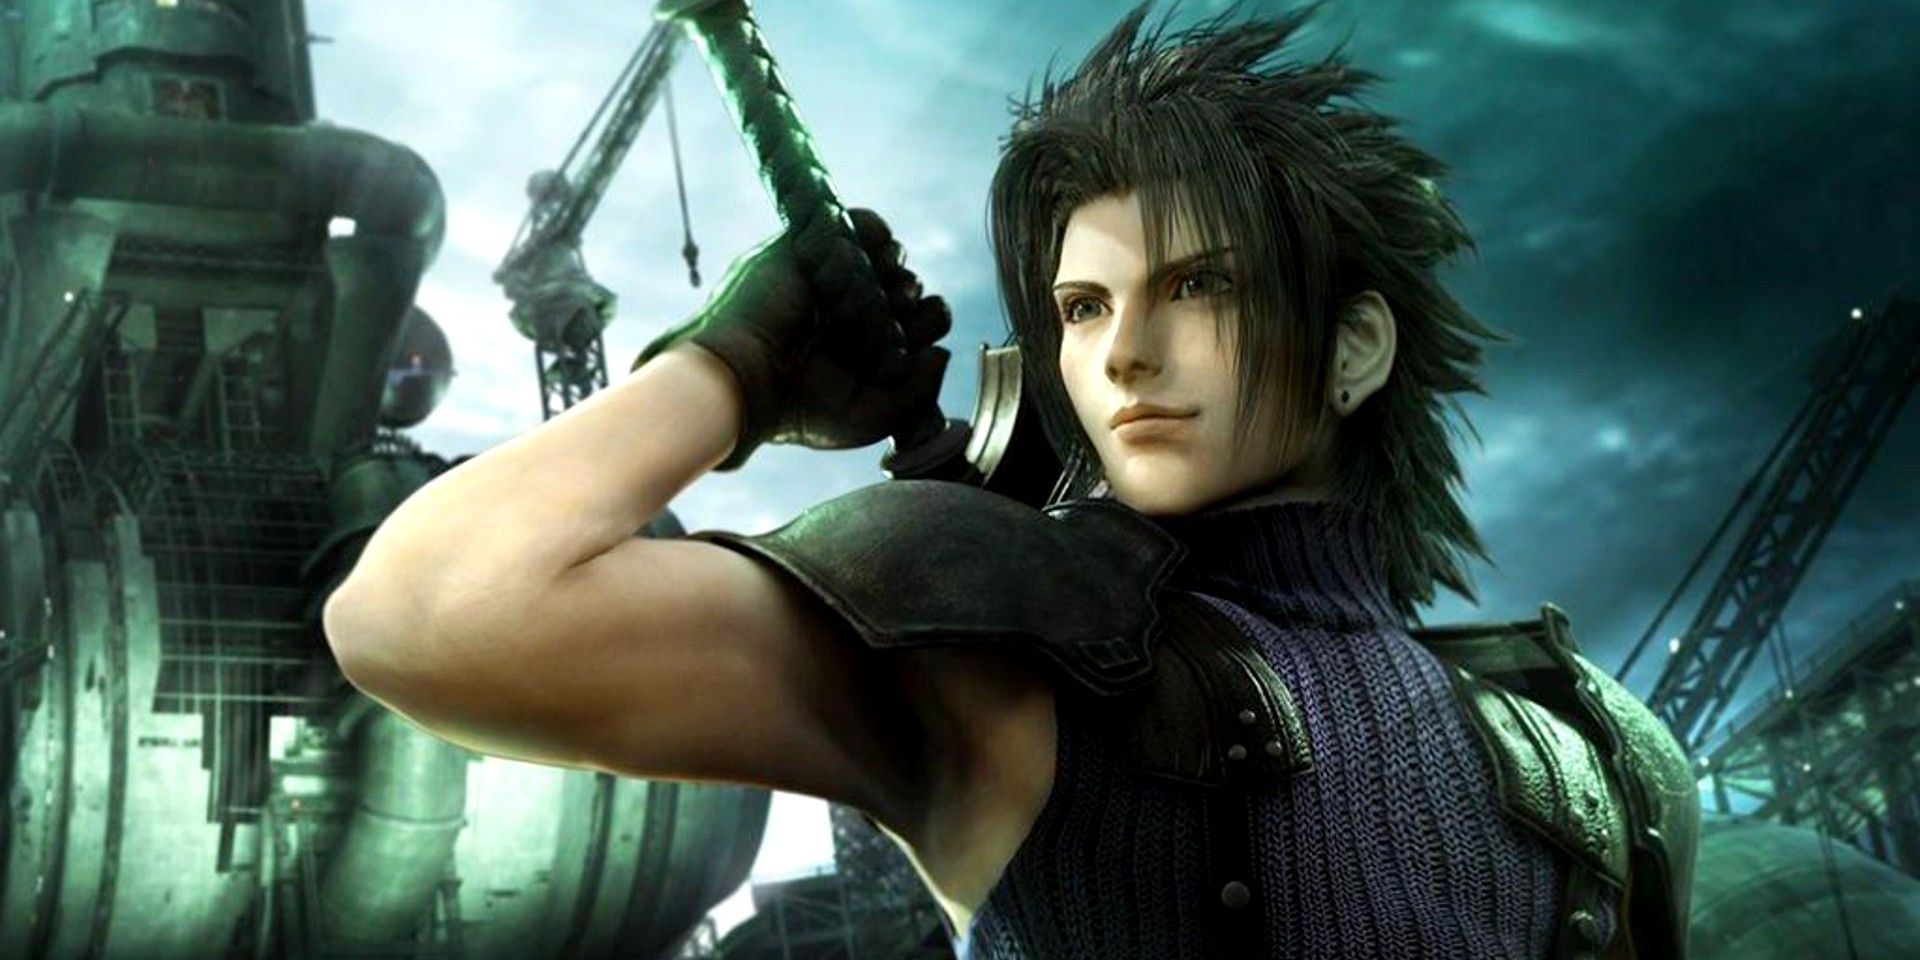 Zack Clutching His Sword in FF7 Crisis Core.